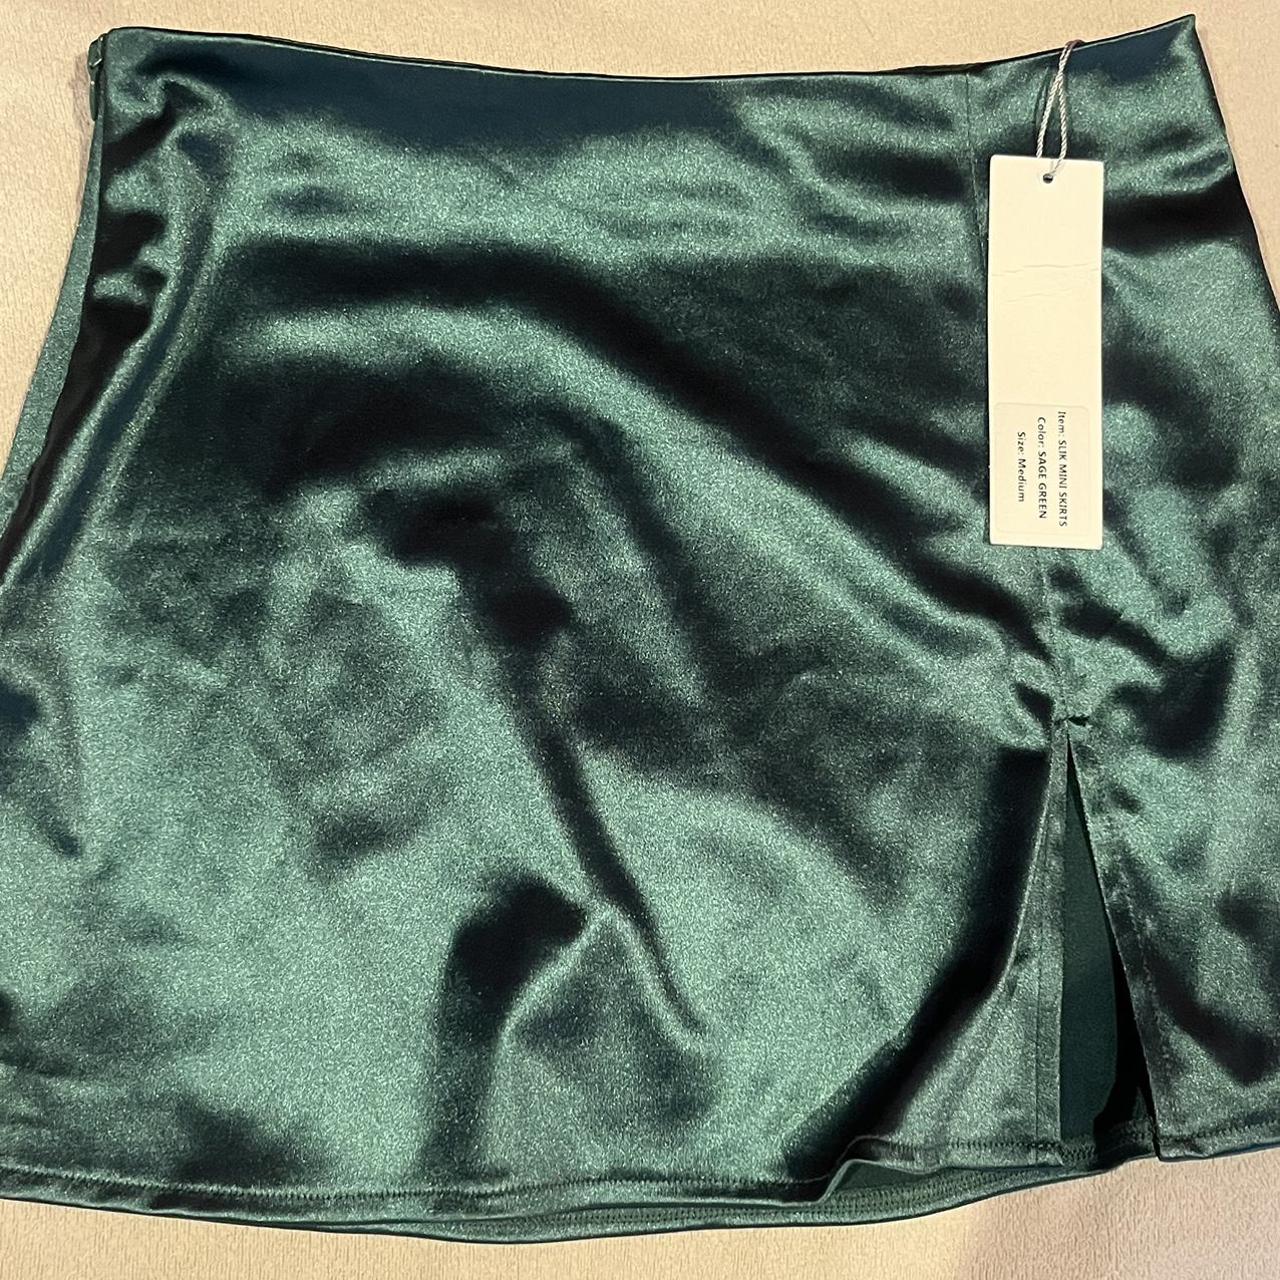 Boutine LA satin skirt never worn with tags - Depop